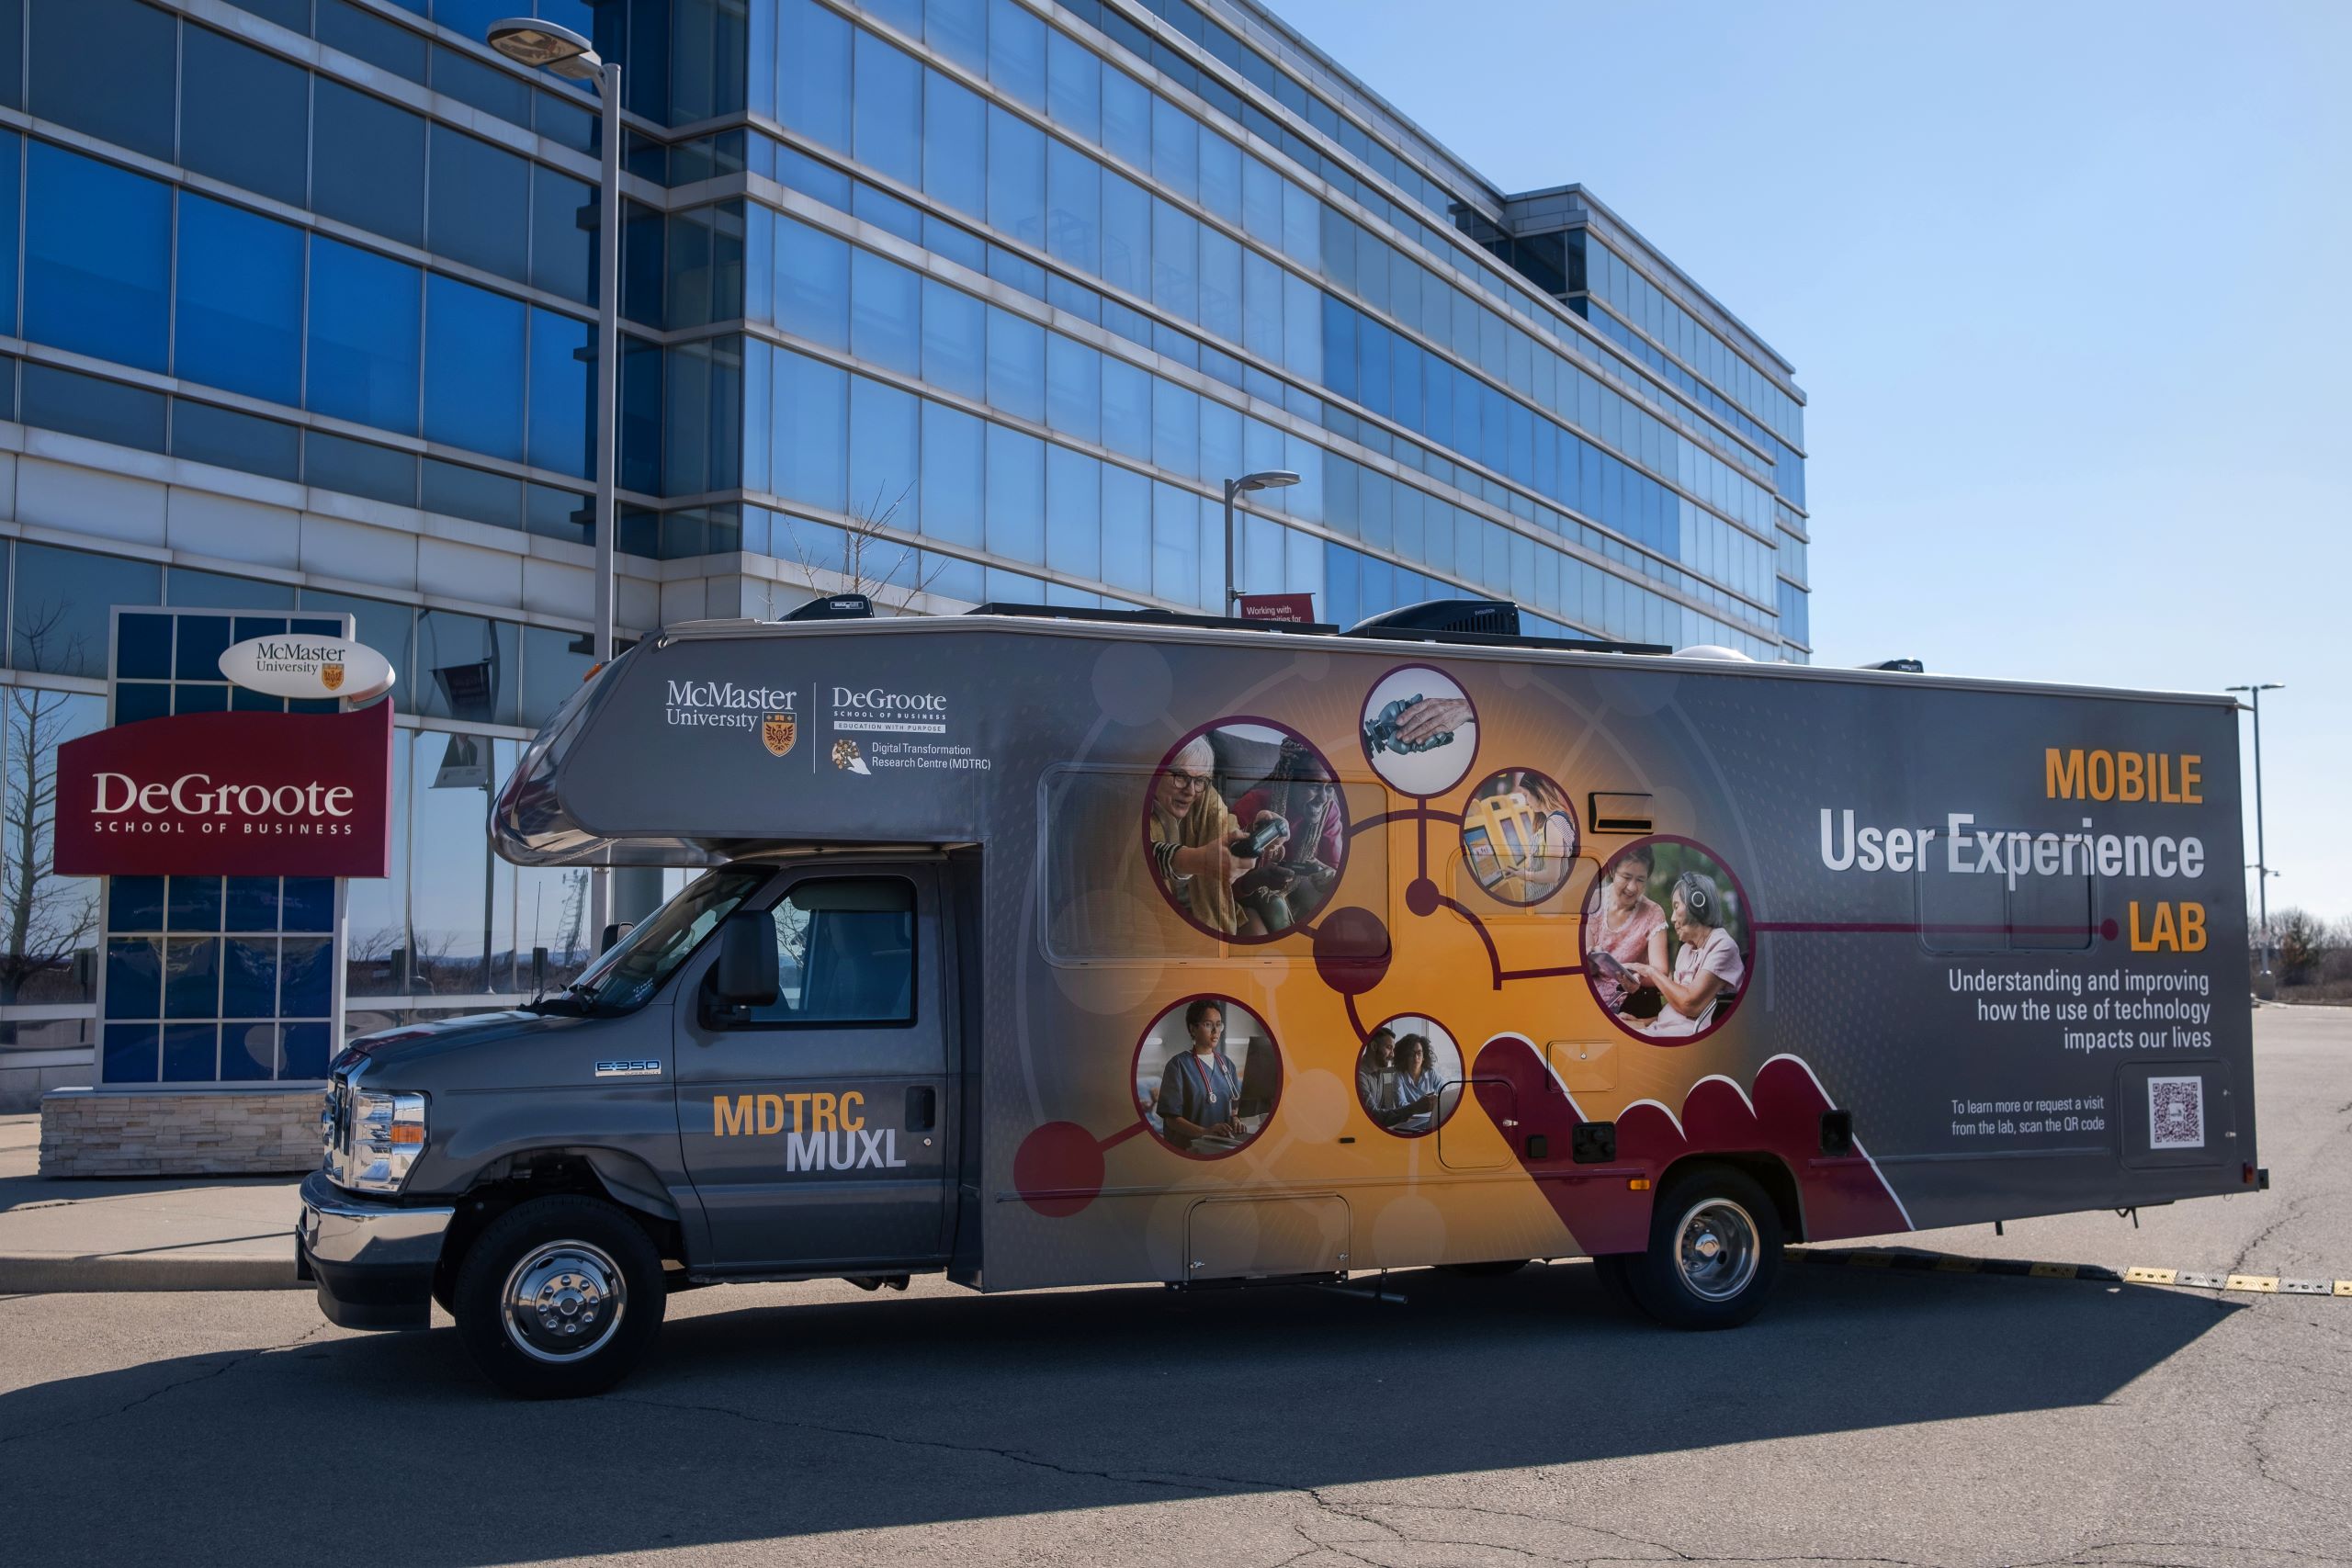 MDTRC's Mobile User Experience Lab at RJC